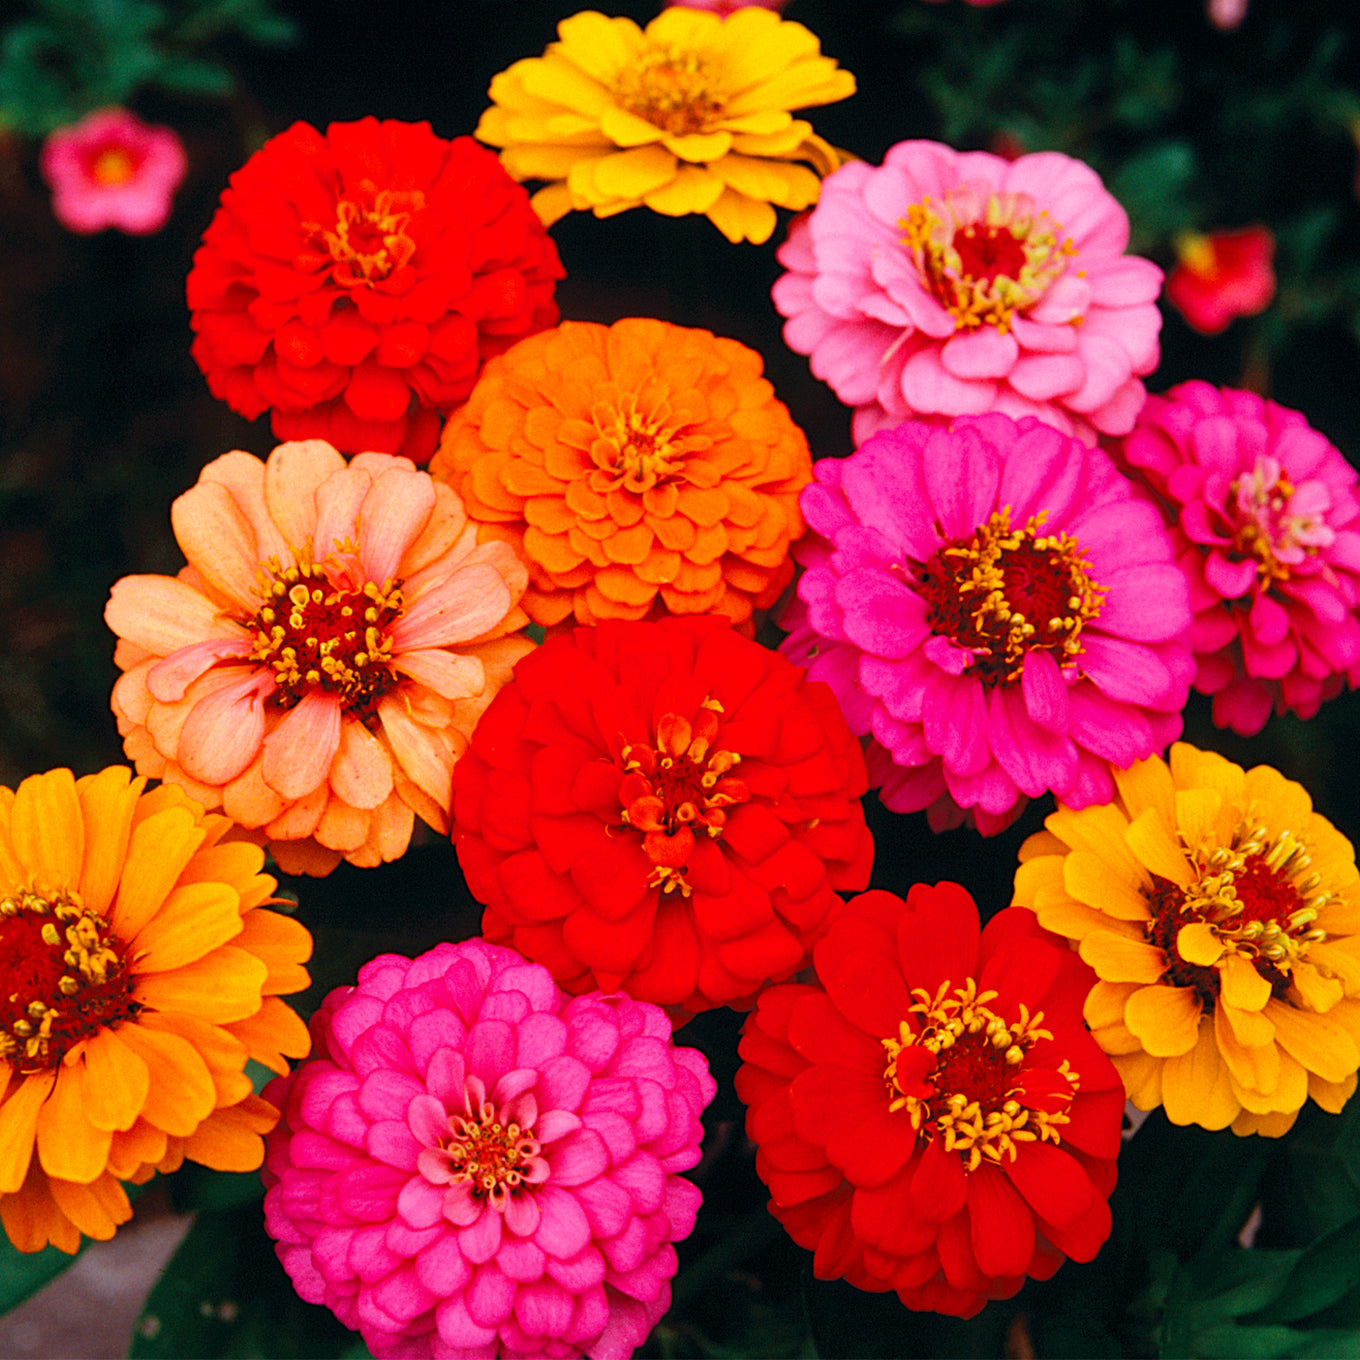 Lilliput Mixed Colors Zinnia seeds from Ferry Morse_fully matured, blooming and cut for a gorgeous bouquet